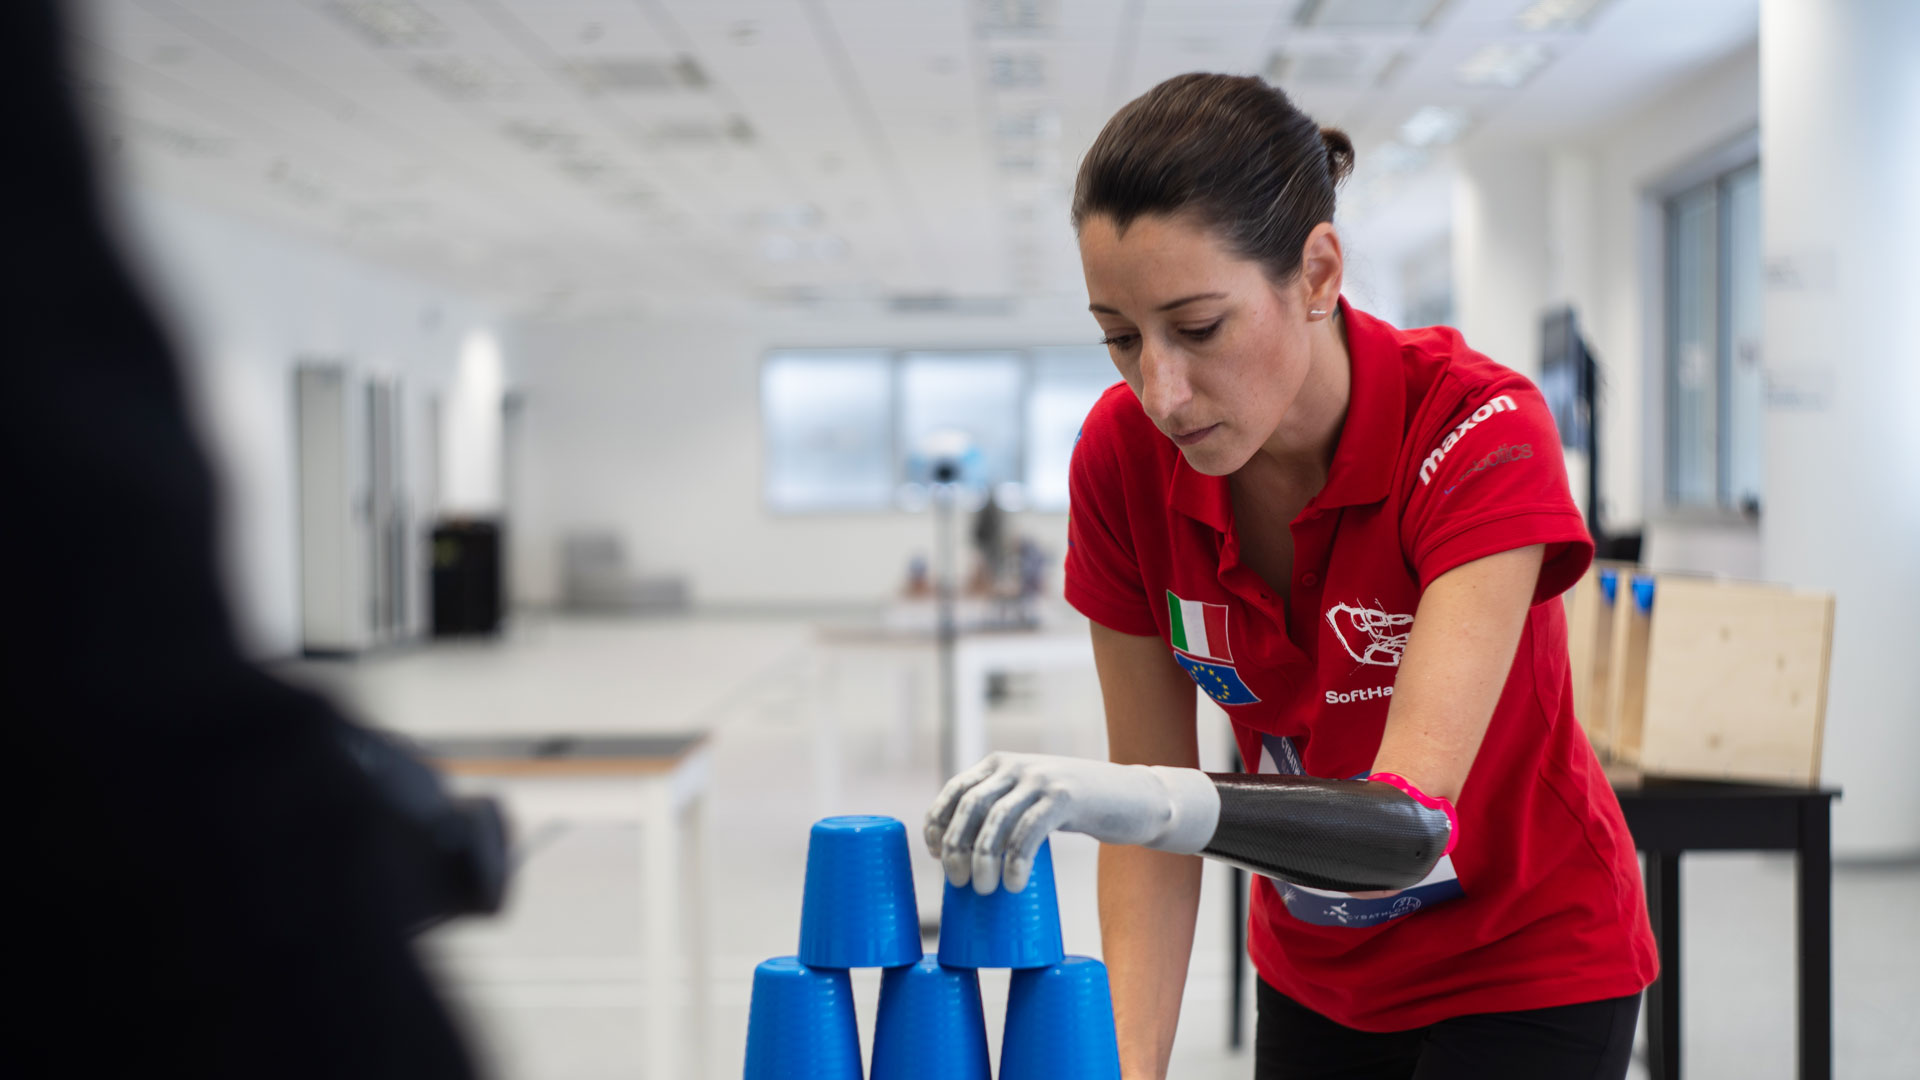 Maria Fossati using the SoftHand Pro prosthetic hand to stack cups.